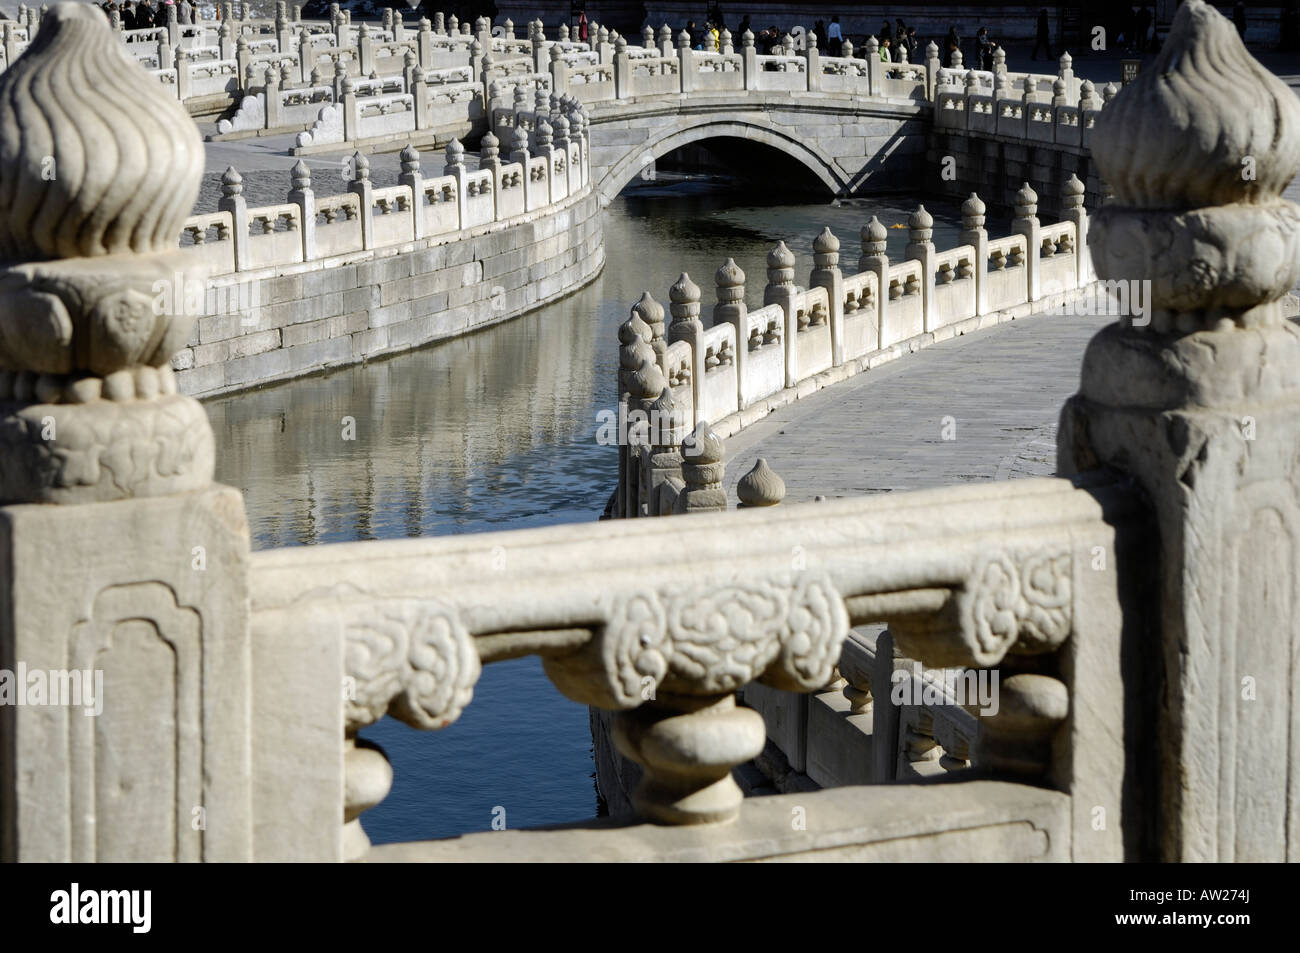 Imperial Palace Museum (Forbidden City) Yudai Bridge and Golden River with marble balustrades. 03-Mar-2008 Stock Photo